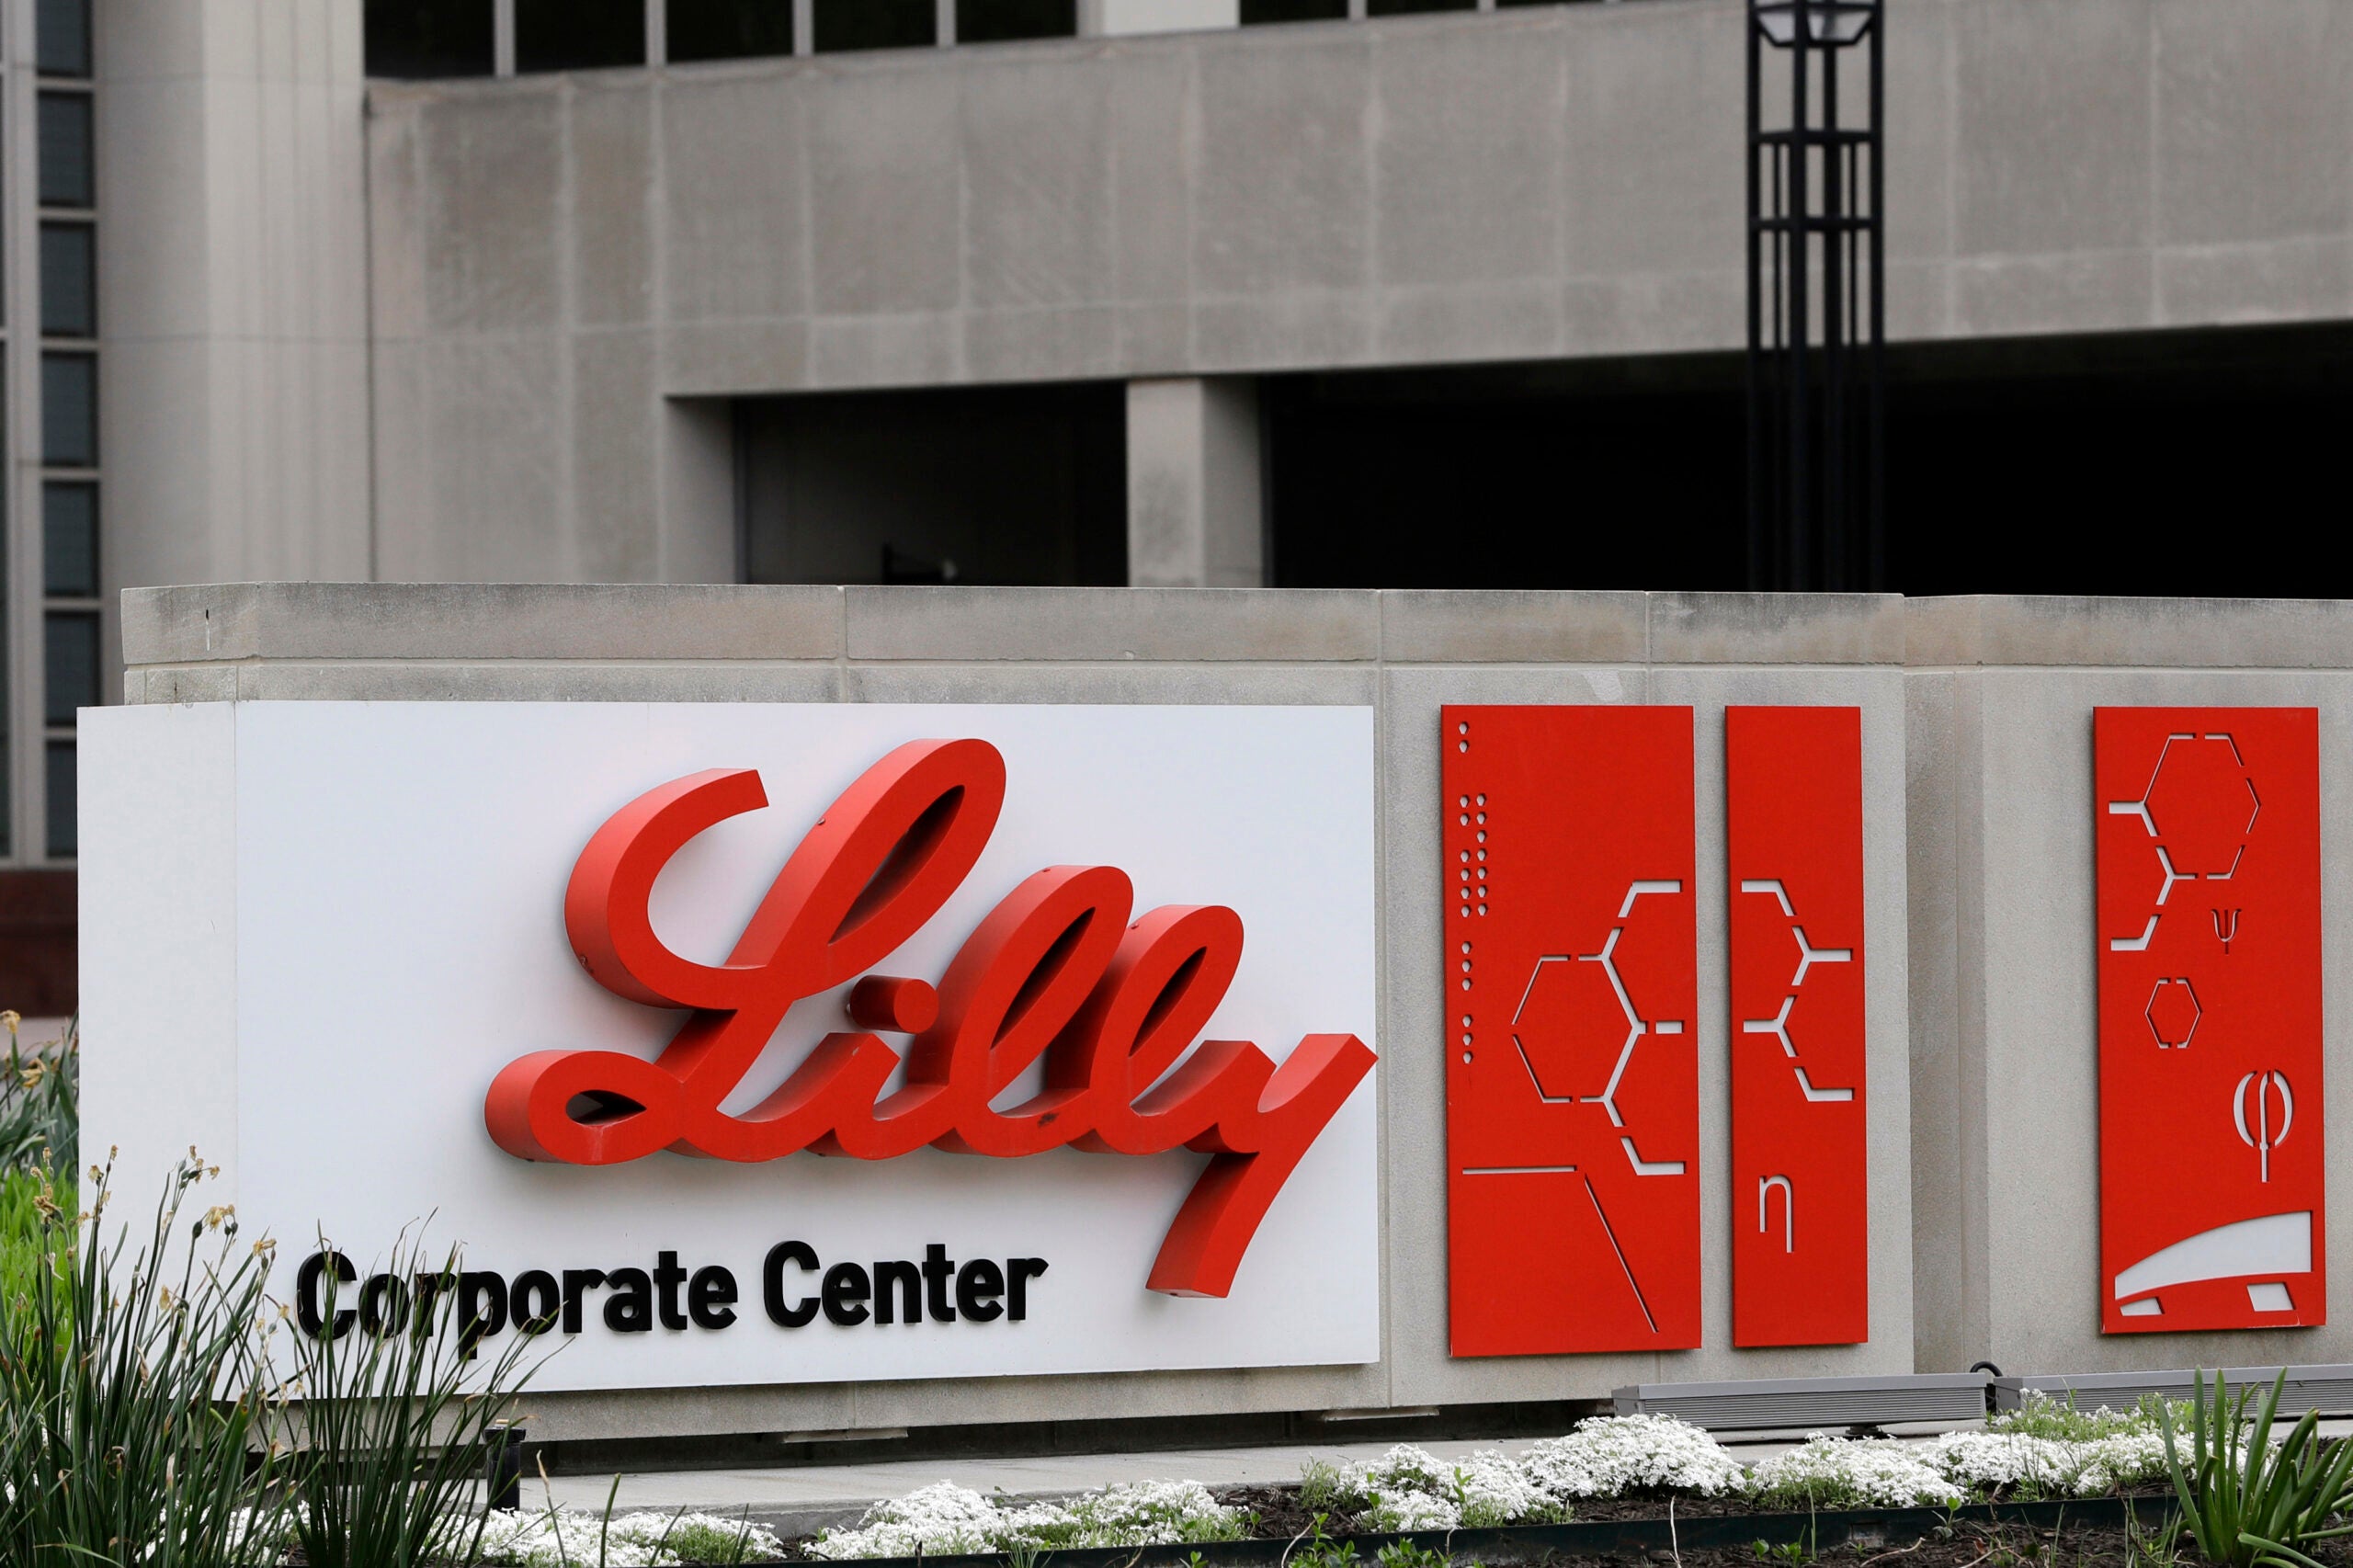 The Eli Lilly & Co. corporate headquarters in Indianapolis. Concrete building with red and black lettering on a white sign.